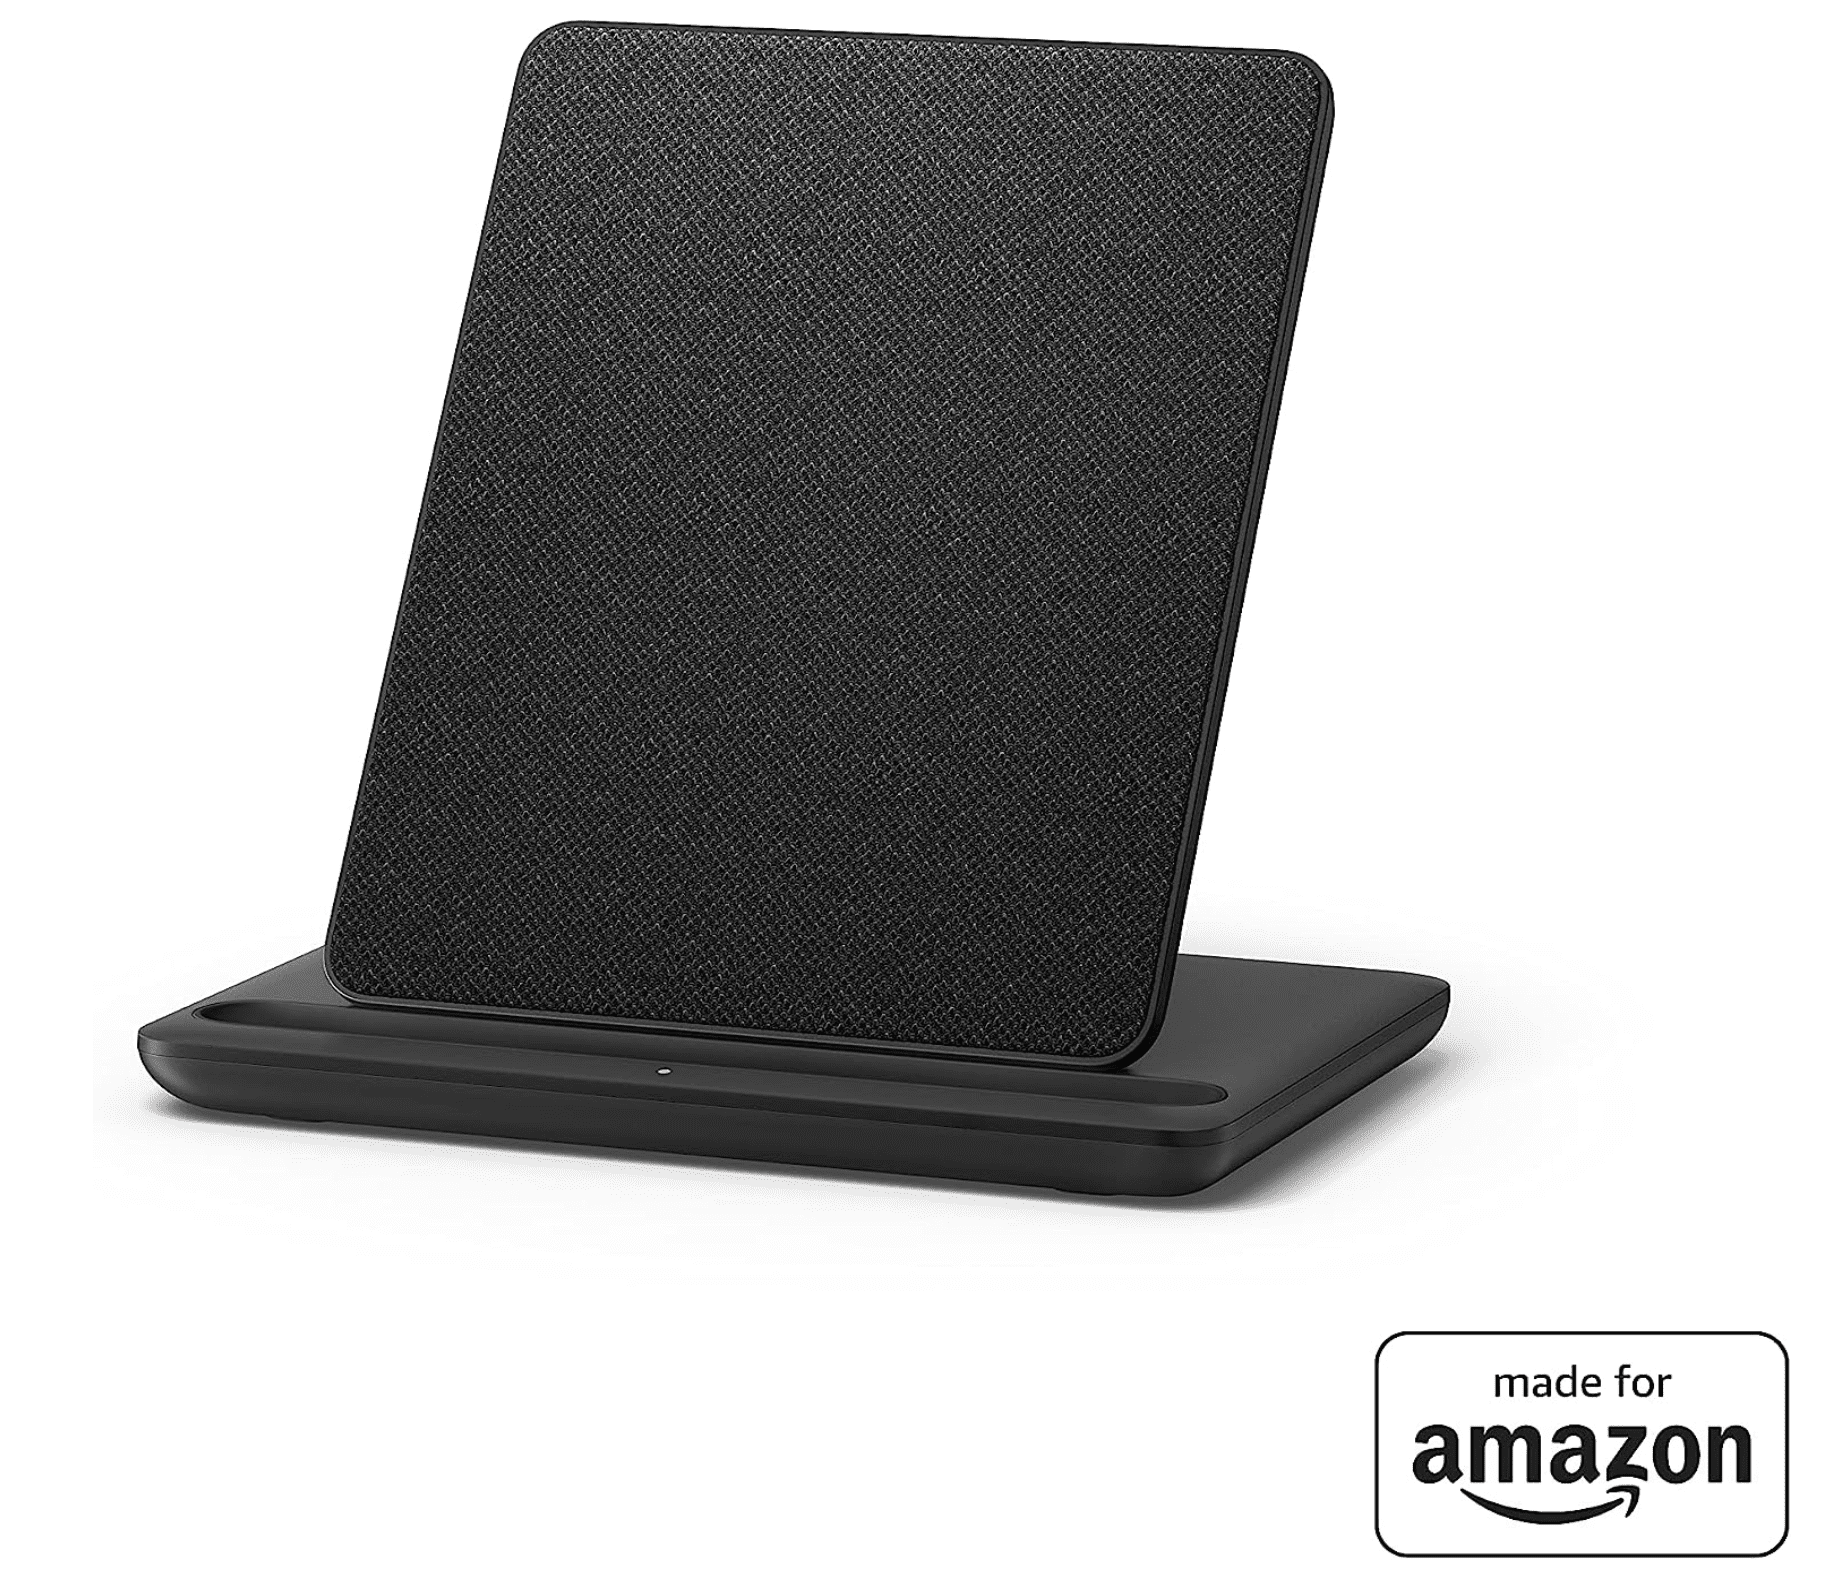 Carlos Electronics - The Kindle Paperwhite 8GB Black thinnest, lightest Kindle  Paperwhite yet, with a sleek, modern design so you can read comfortably for  hours. Visit us in-store Link to shop online 